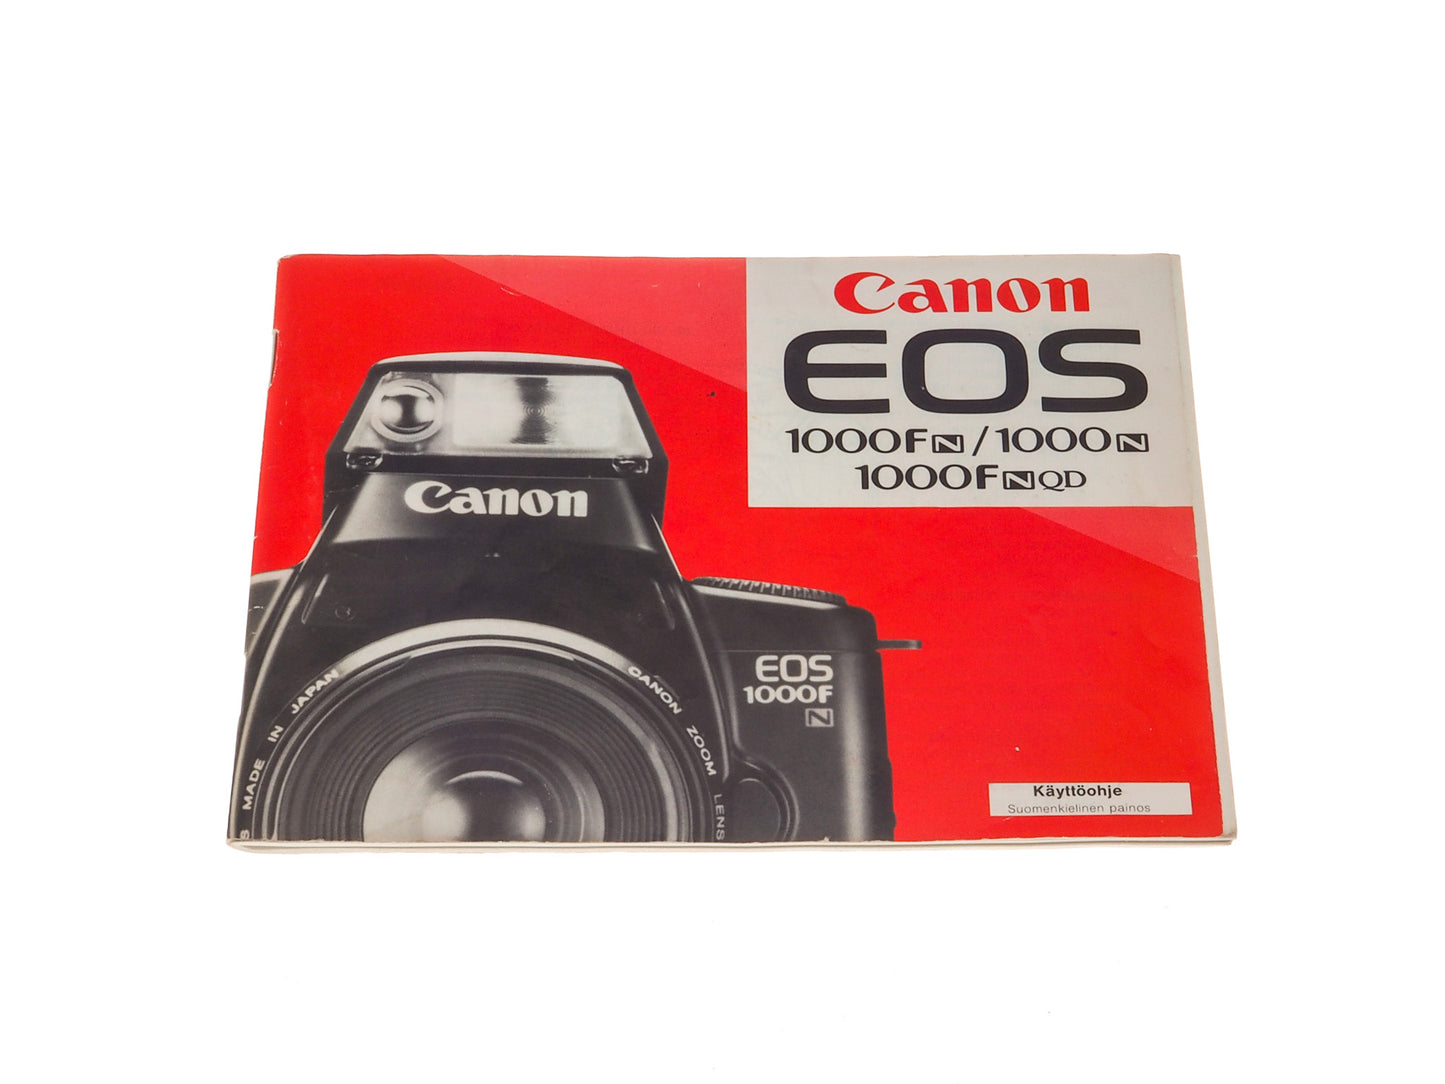 Canon EOS 1000FN/1000N/100FNQD Instructions